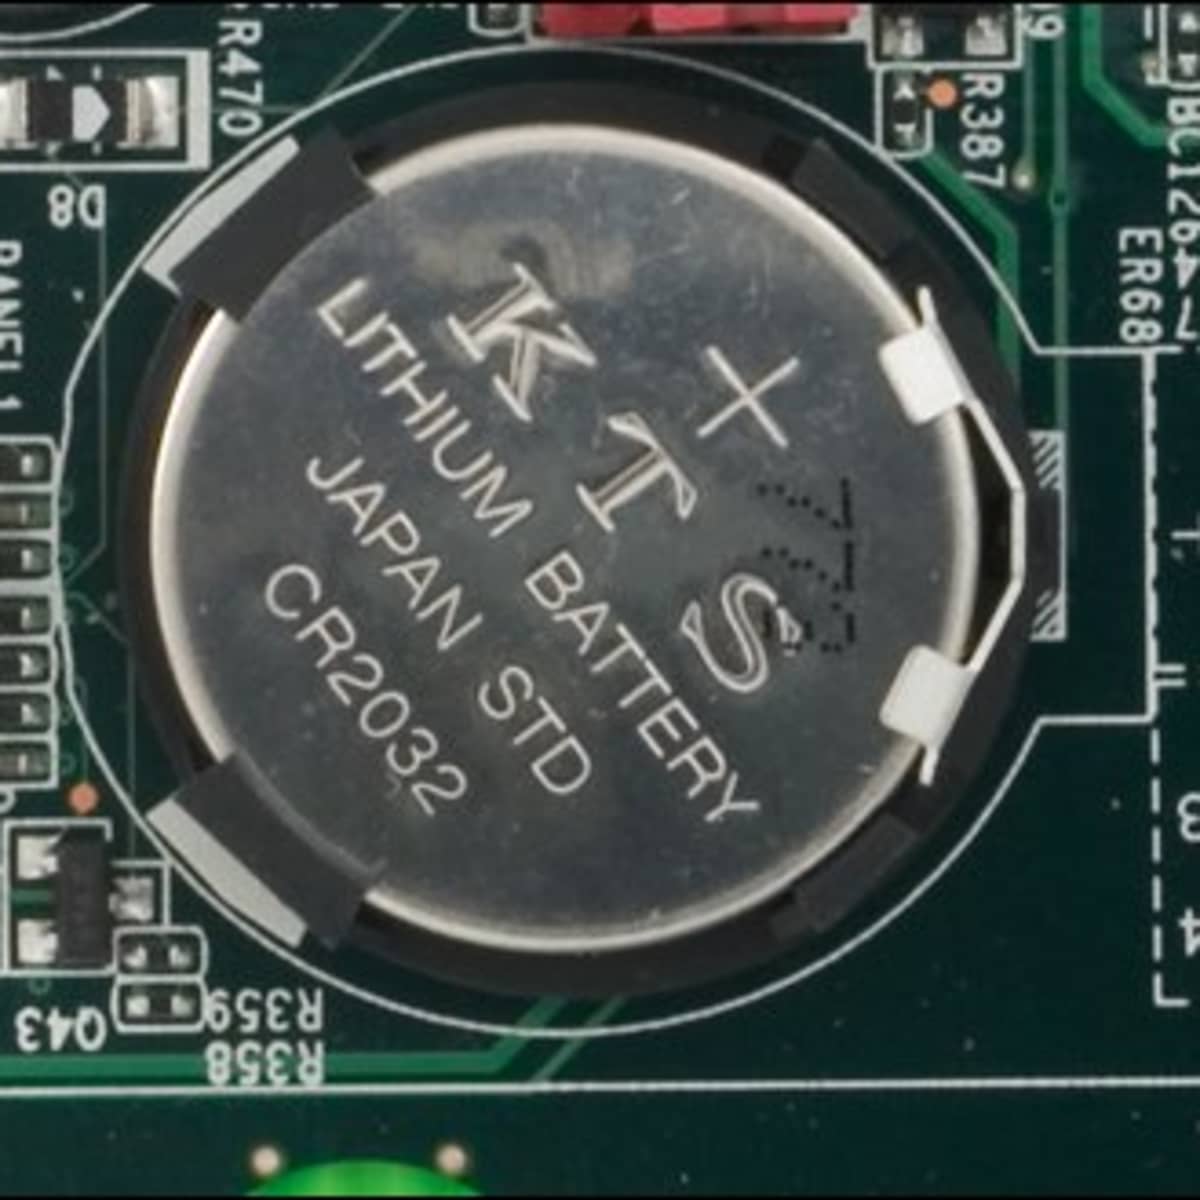 Centrum kandidat biografi How to Replace the CMOS Battery - TurboFuture